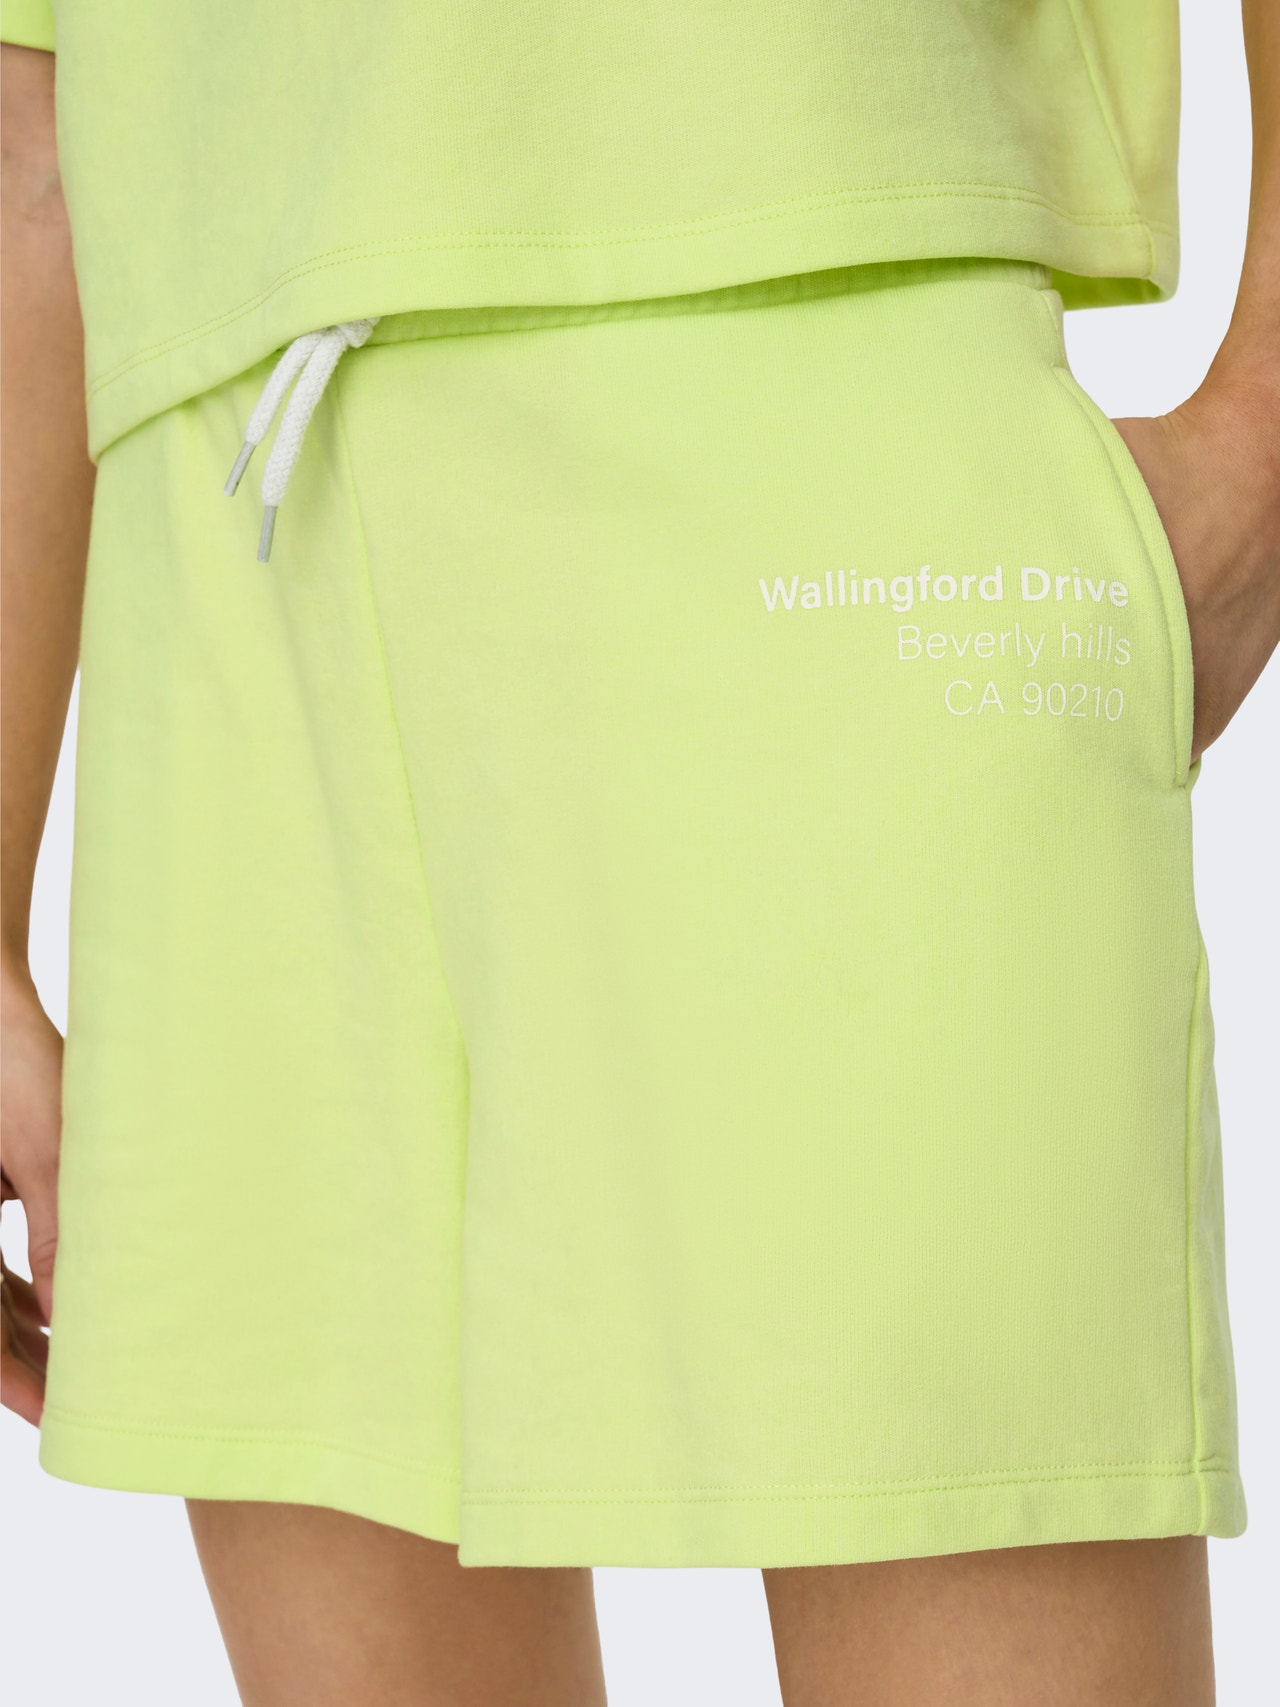 ONLY Sweat shorts -Sunny Lime - 15293692